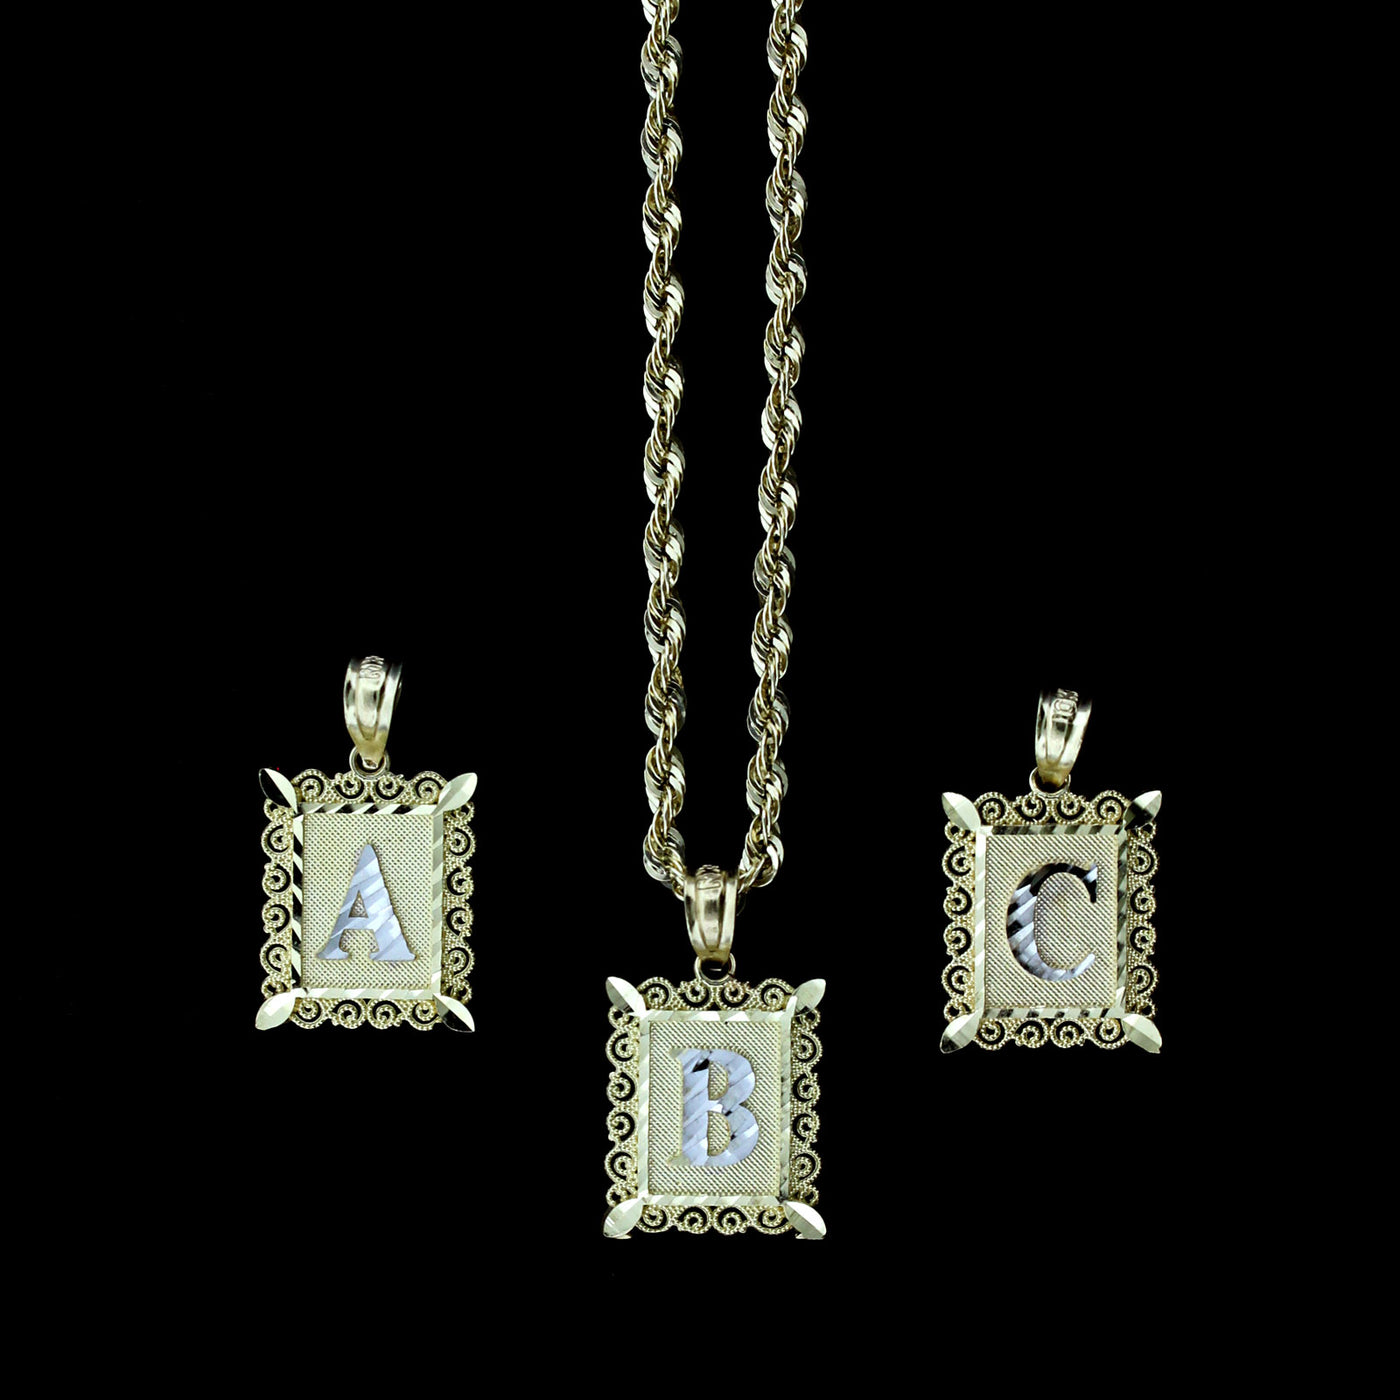 10K Solid Yellow Gold Initial Letter Plate Pendant A-Z Alphabet Charm Rope Chain Necklace Set